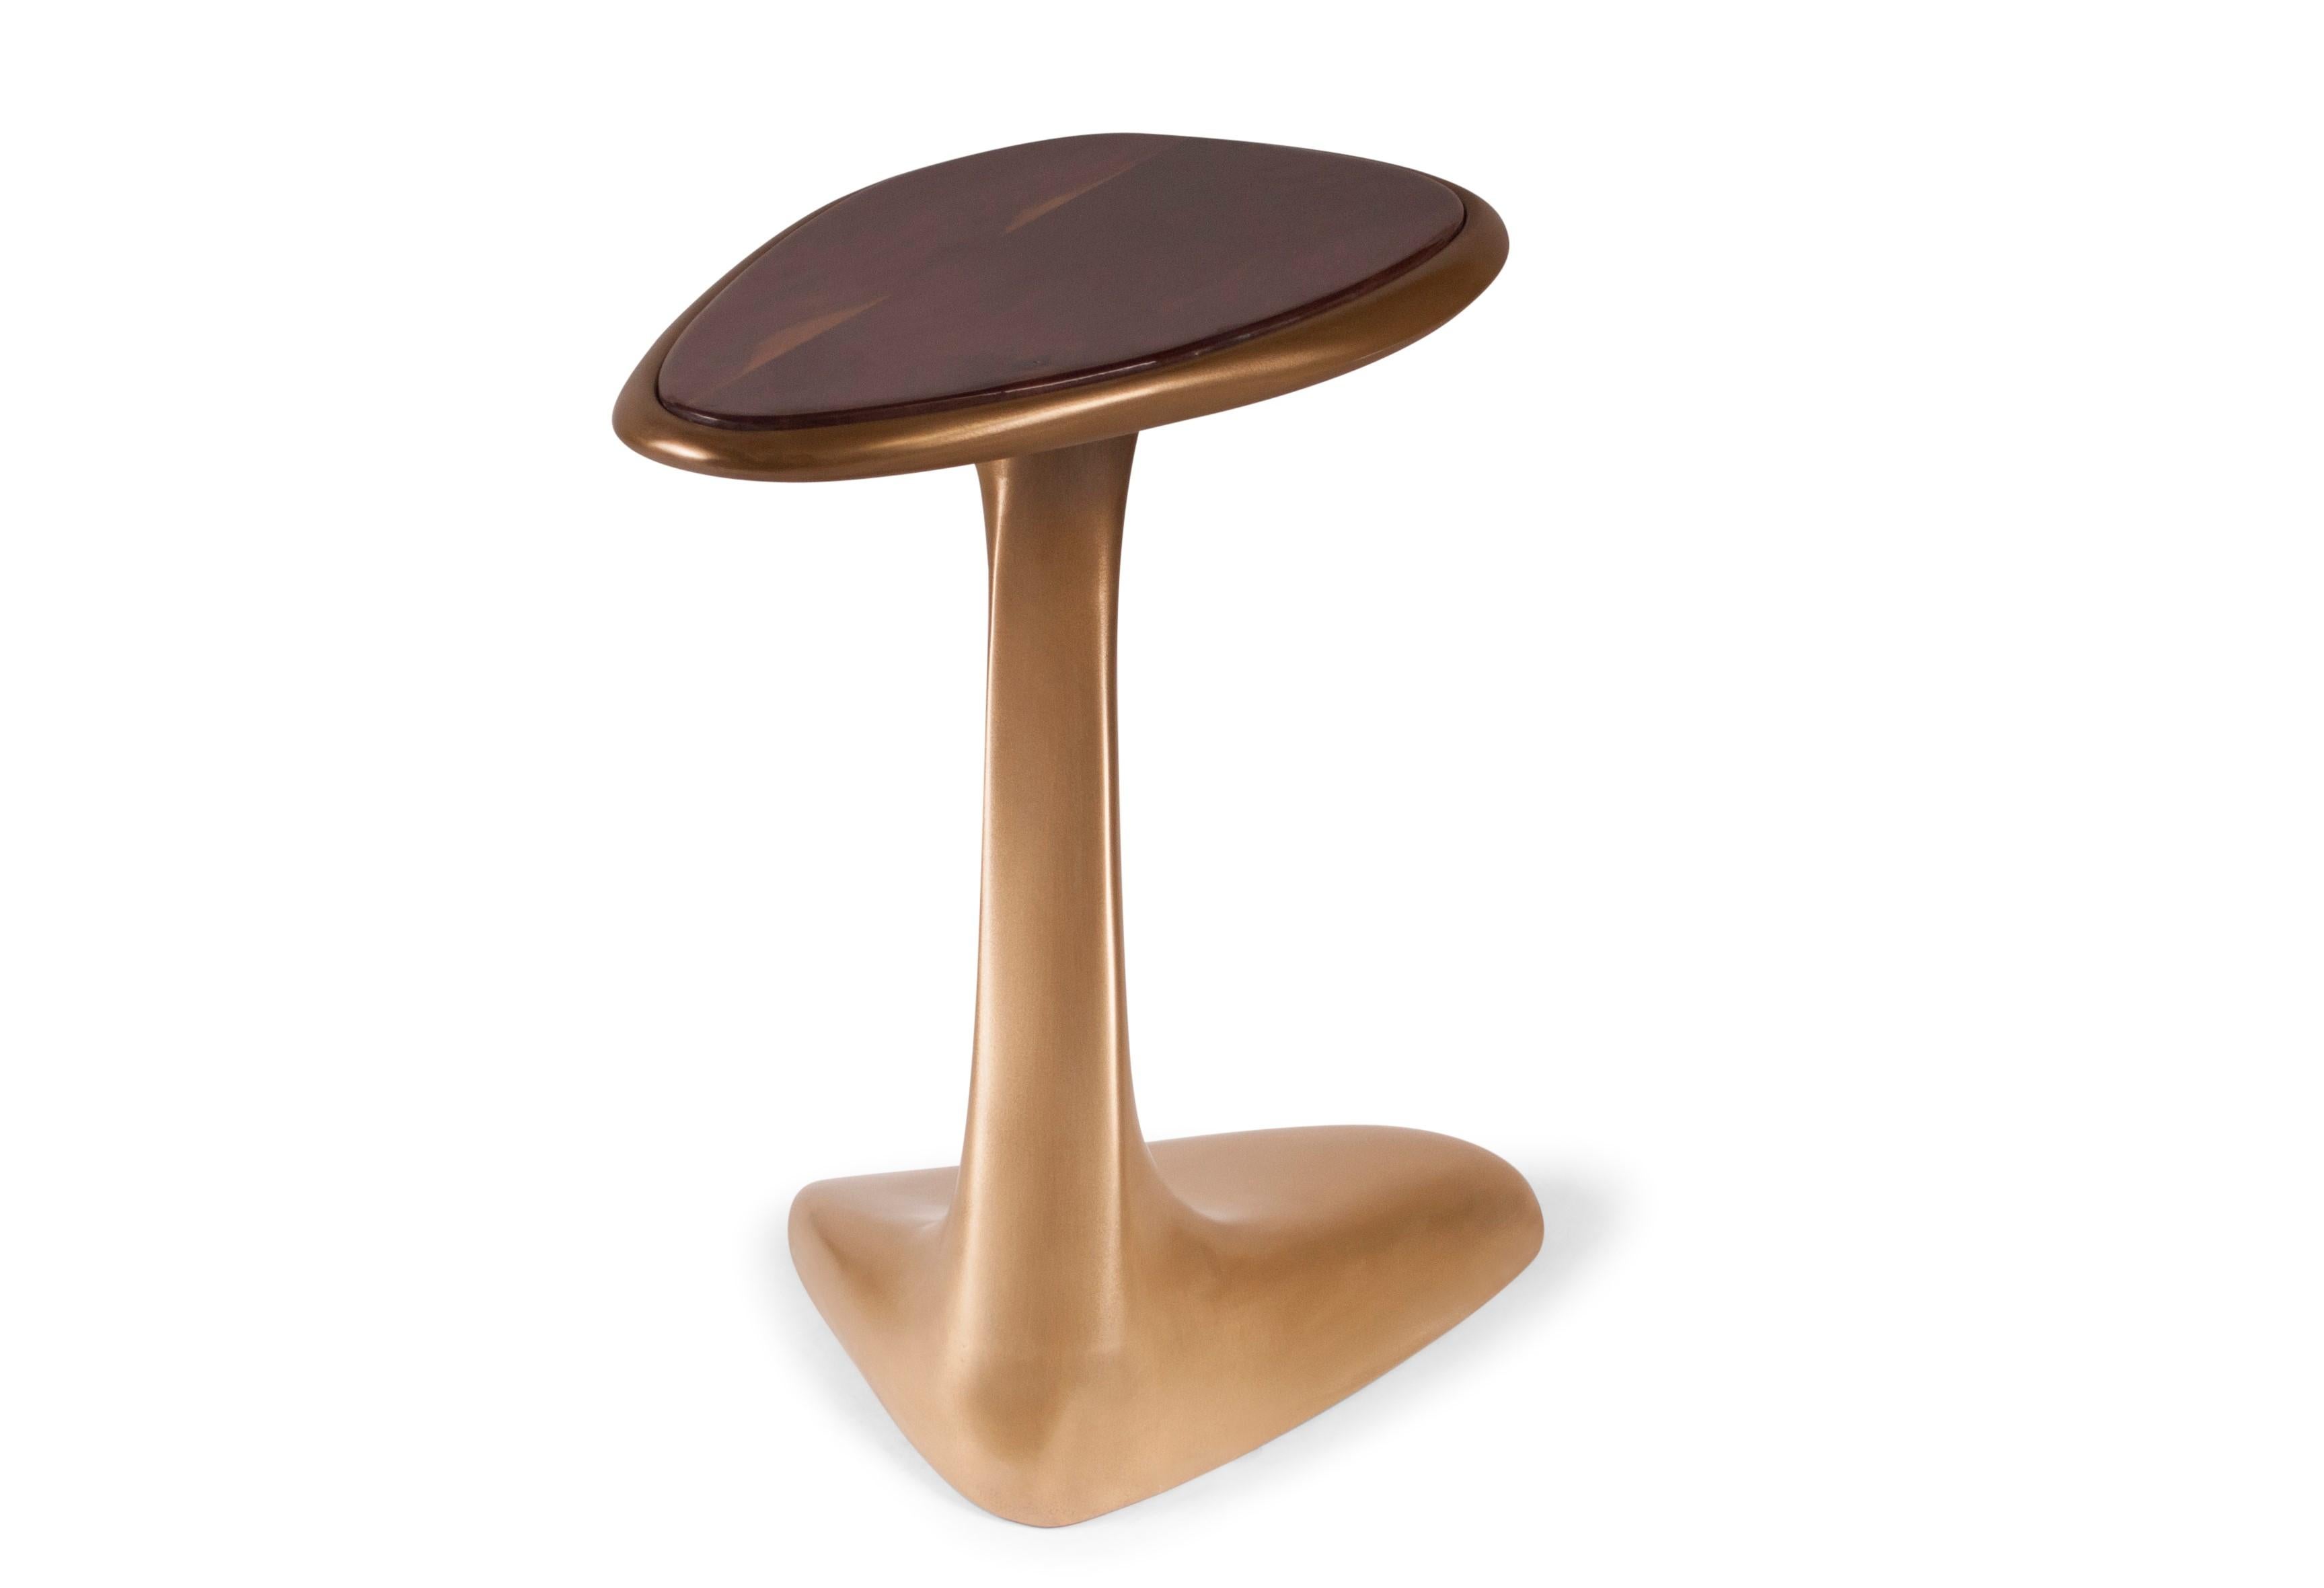 The palm side table is made out of wood with our custom gold finish with high polished walnut top.

About Amorph: 
Amorph is a design and manufacturing company based in Los Angeles, California. We take pride in hand crafted designs connected to